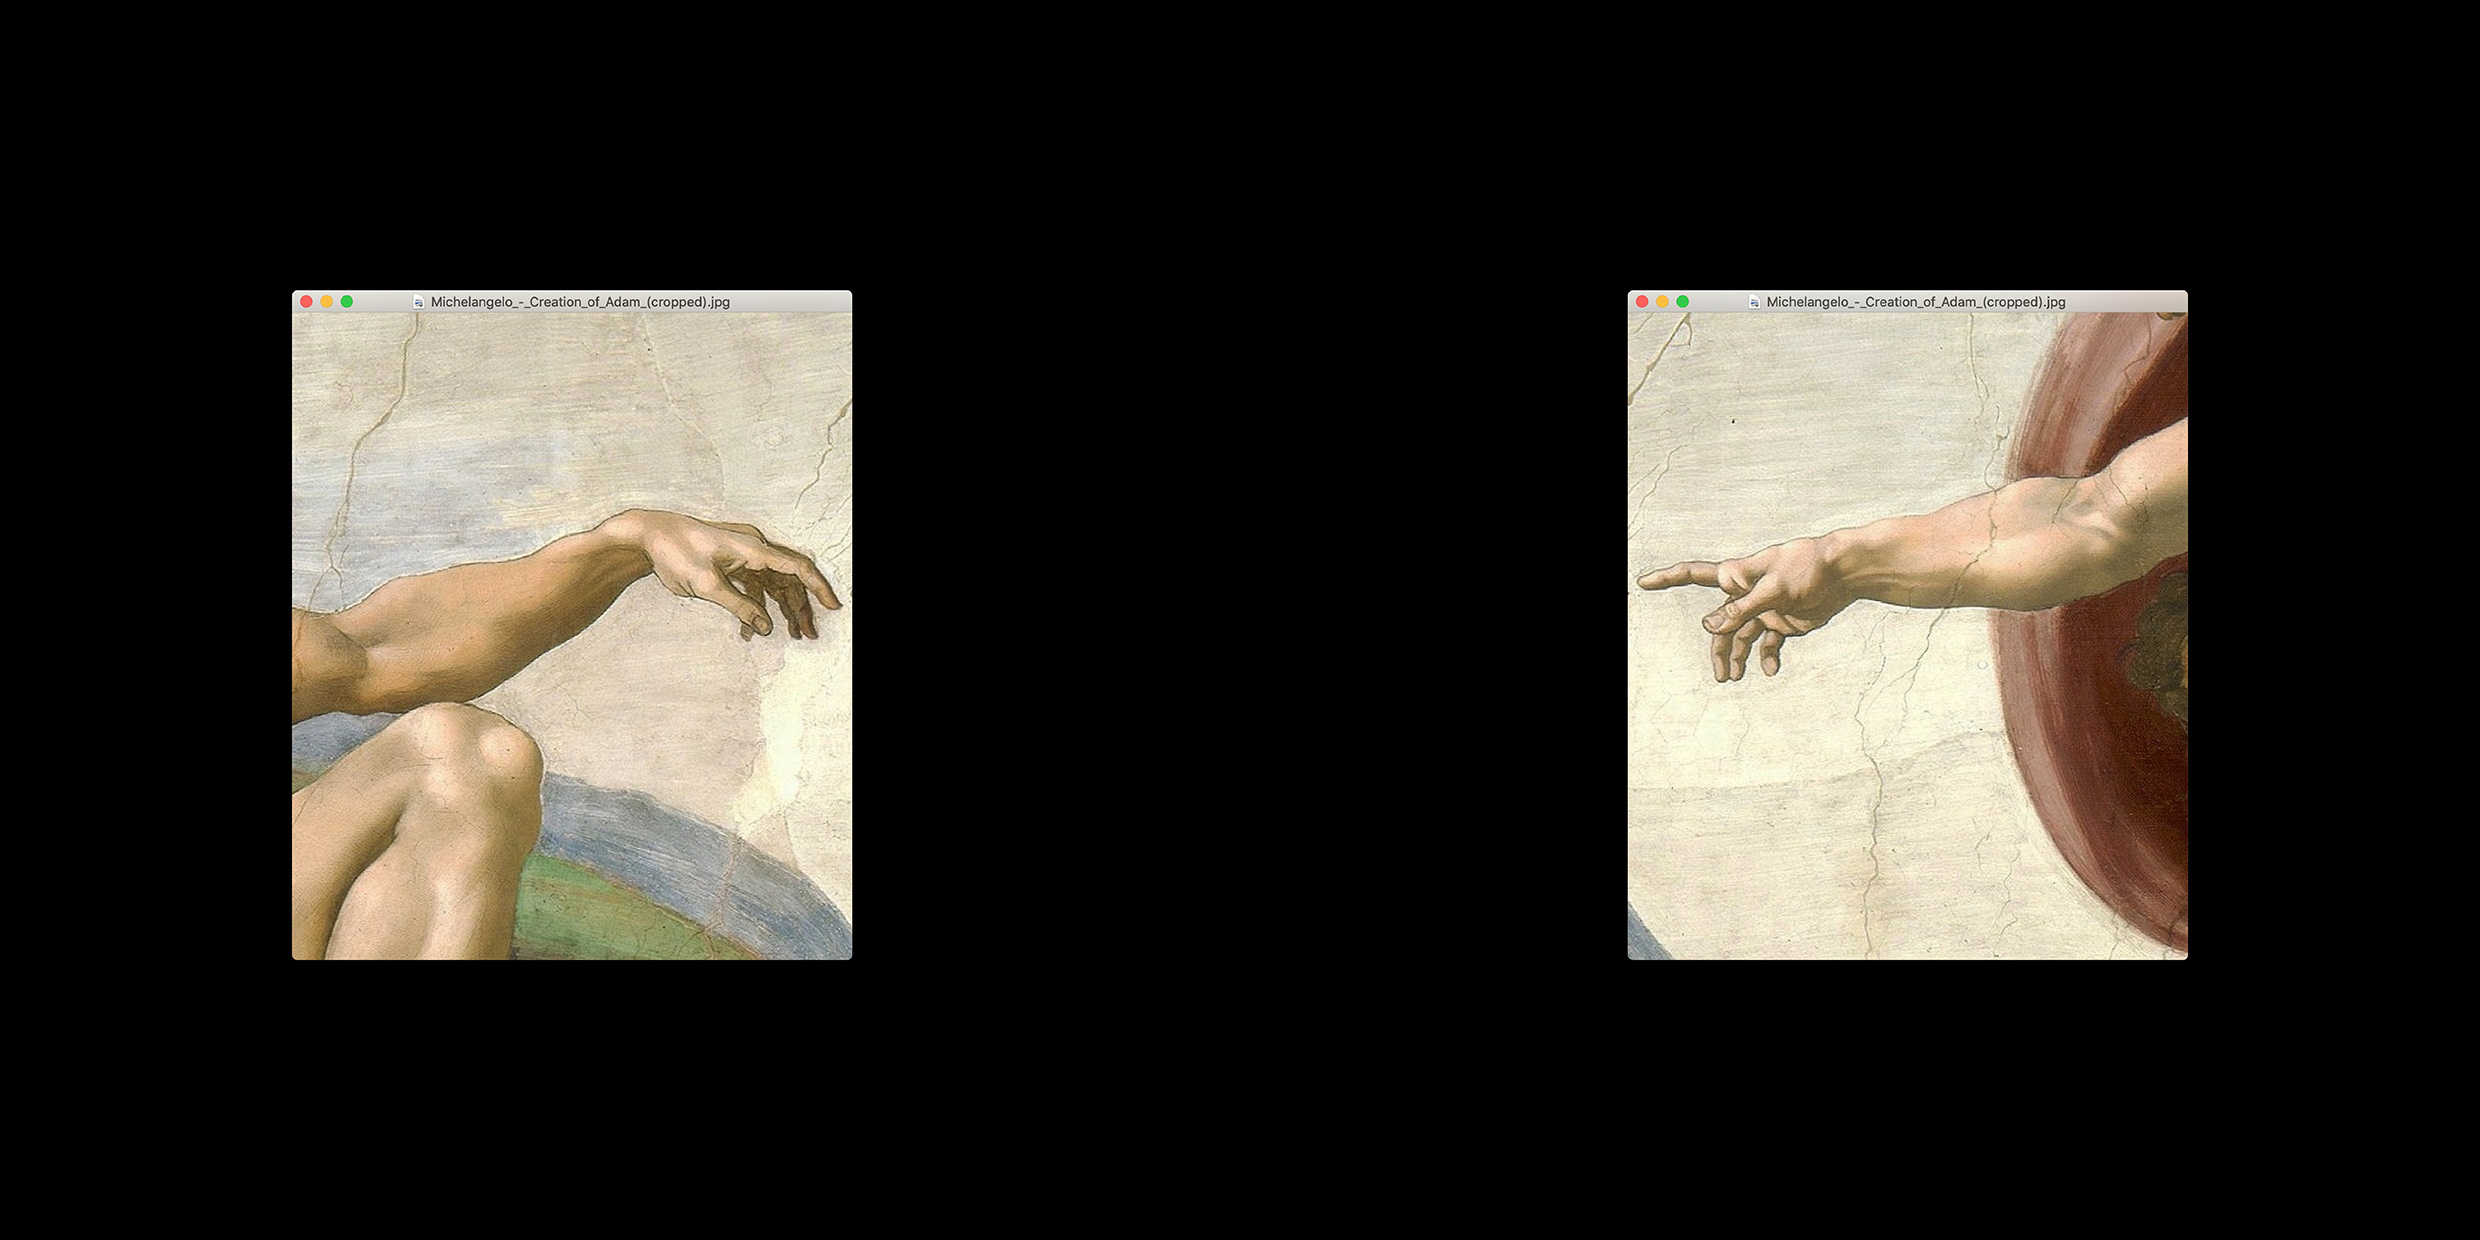 Two inset images from "The Creation of Adam" by Michelangelo